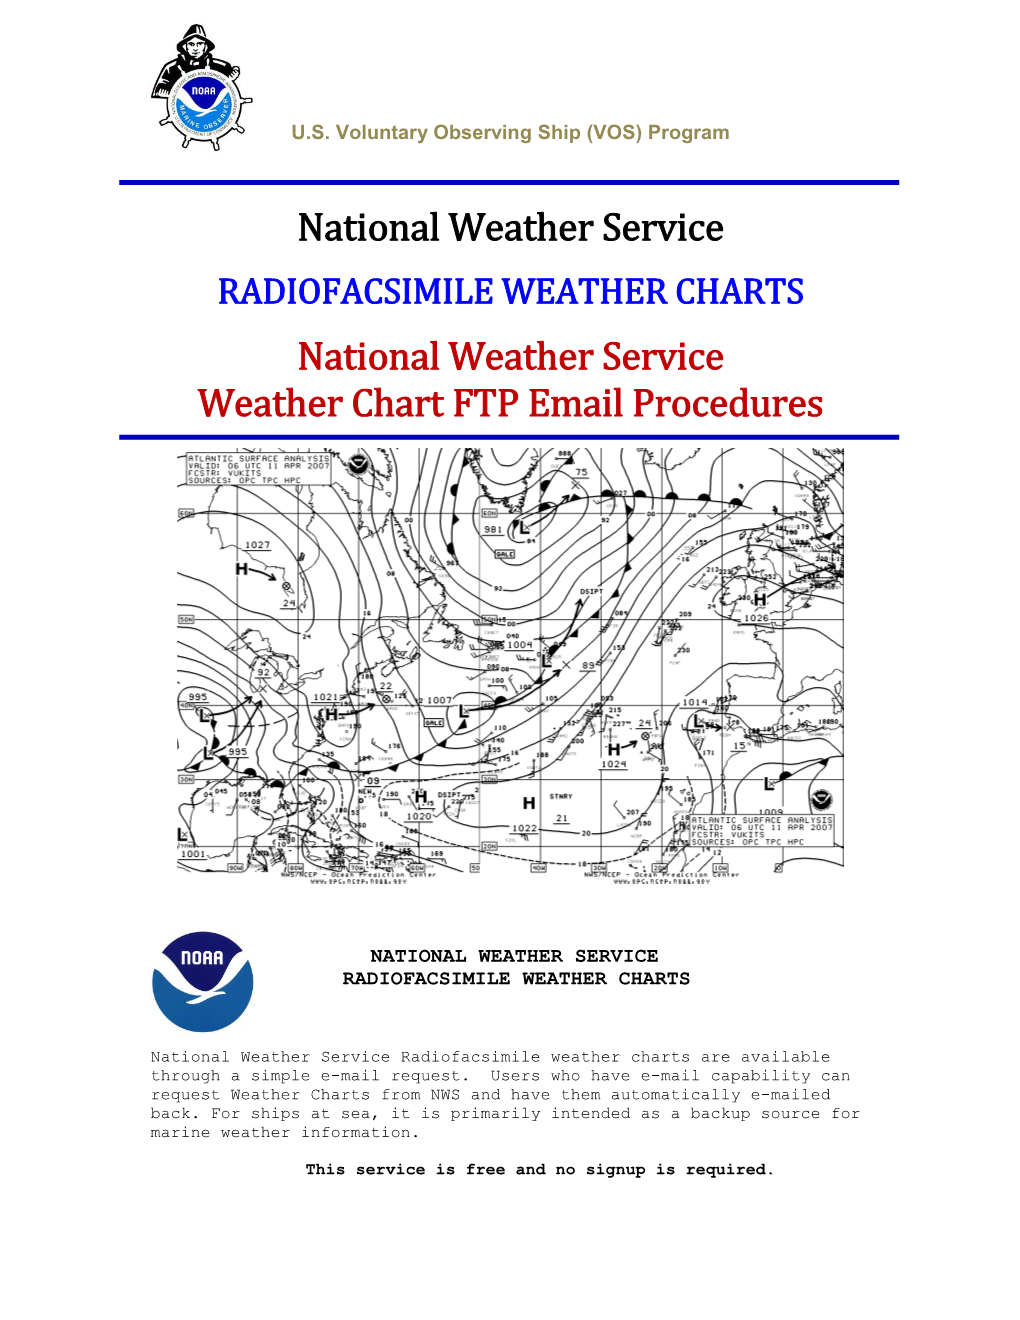 National Weather Service Products Available Via E-MAIL (FTPMAIL)